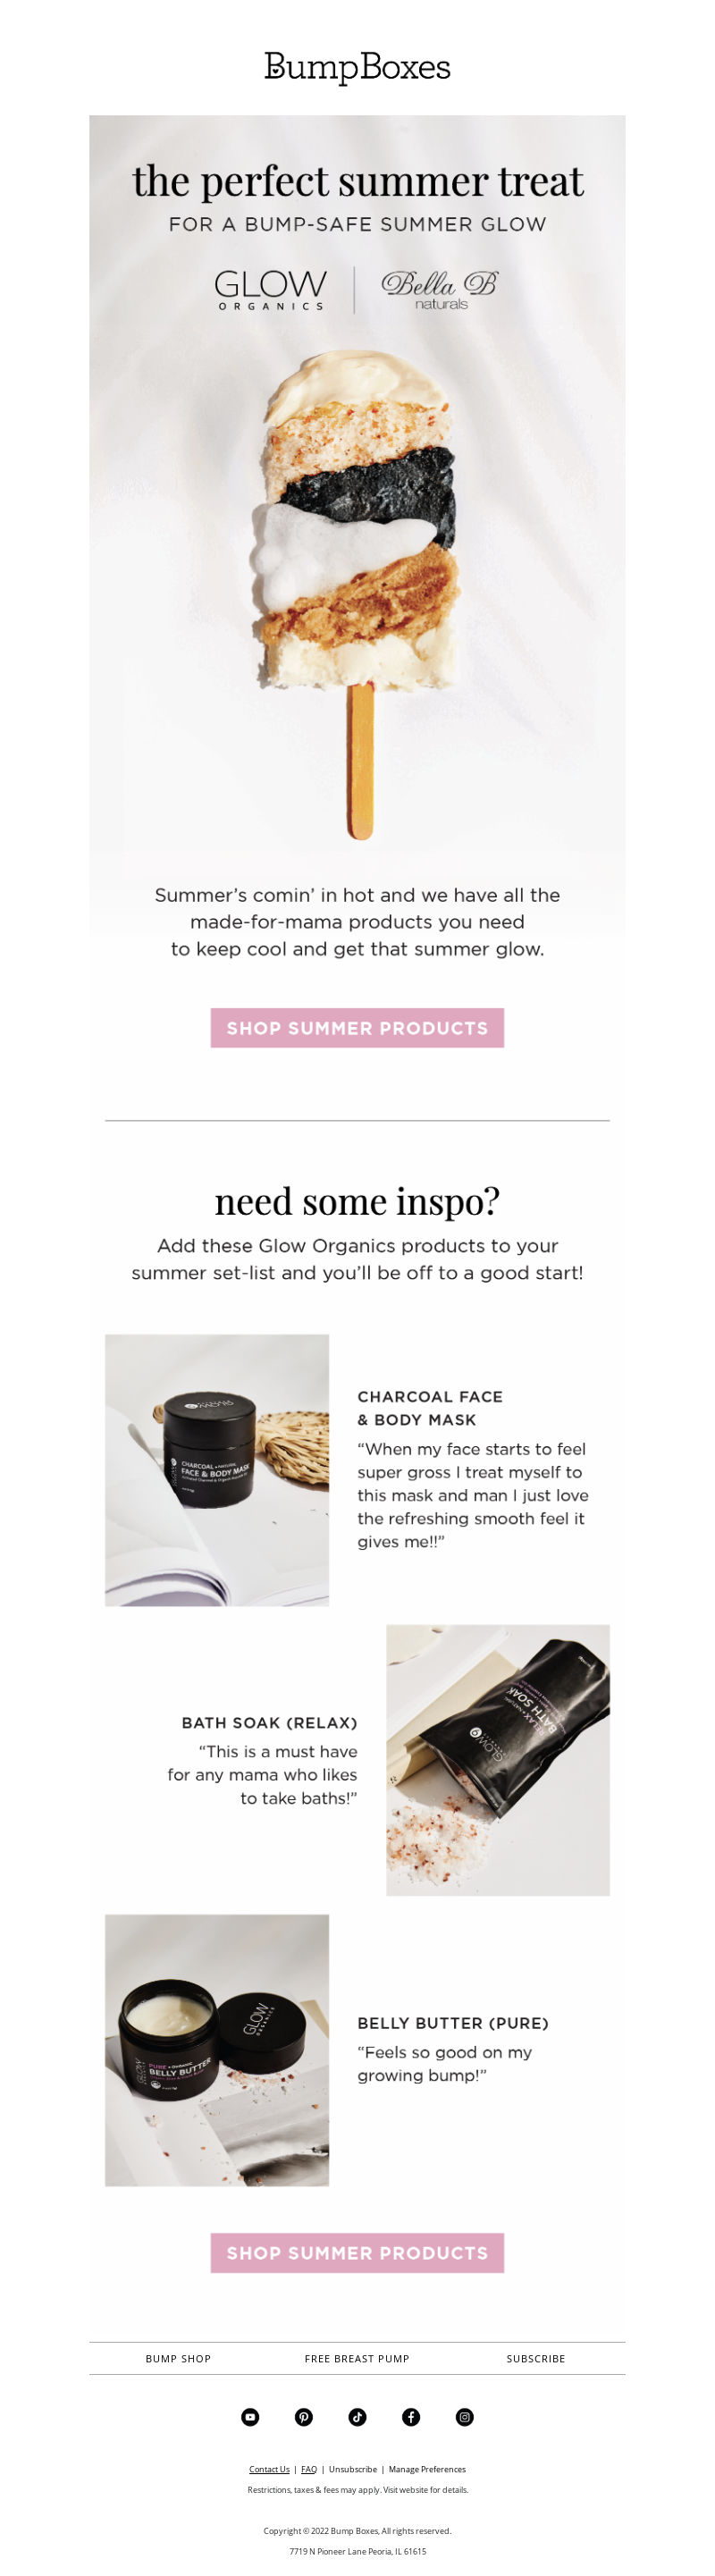 Bump Boxes sent a seasonally relevant email during the Summer